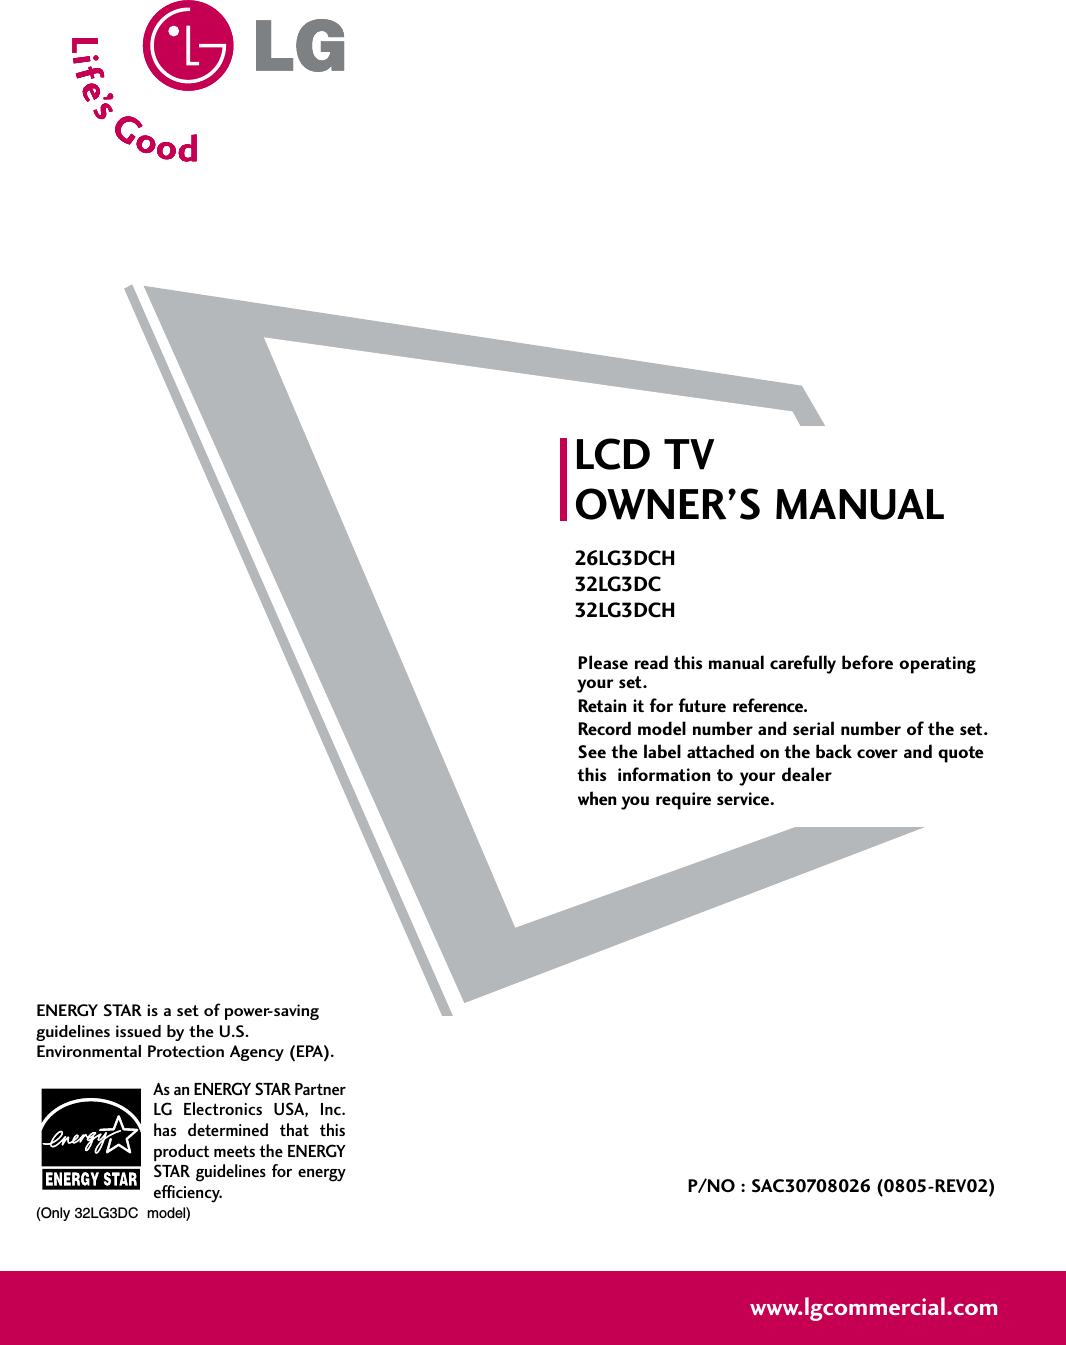 Please read this manual carefully before operatingyour set. Retain it for future reference.Record model number and serial number of the set. See the label attached on the back cover and quote this  information to your dealer when you require service.LCD TVOWNER’S MANUAL26LG3DCH32LG3DC32LG3DCHP/NO : SAC30708026 (0805-REV02)www.lgcommercial.comAs an ENERGY STAR PartnerLG Electronics USA, Inc.has determined that thisproduct meets the ENERGYSTAR guidelines for energyefficiency.ENERGY STAR is a set of power-savingguidelines issued by the U.S.Environmental Protection Agency (EPA).(Only 32LG3DC  model)